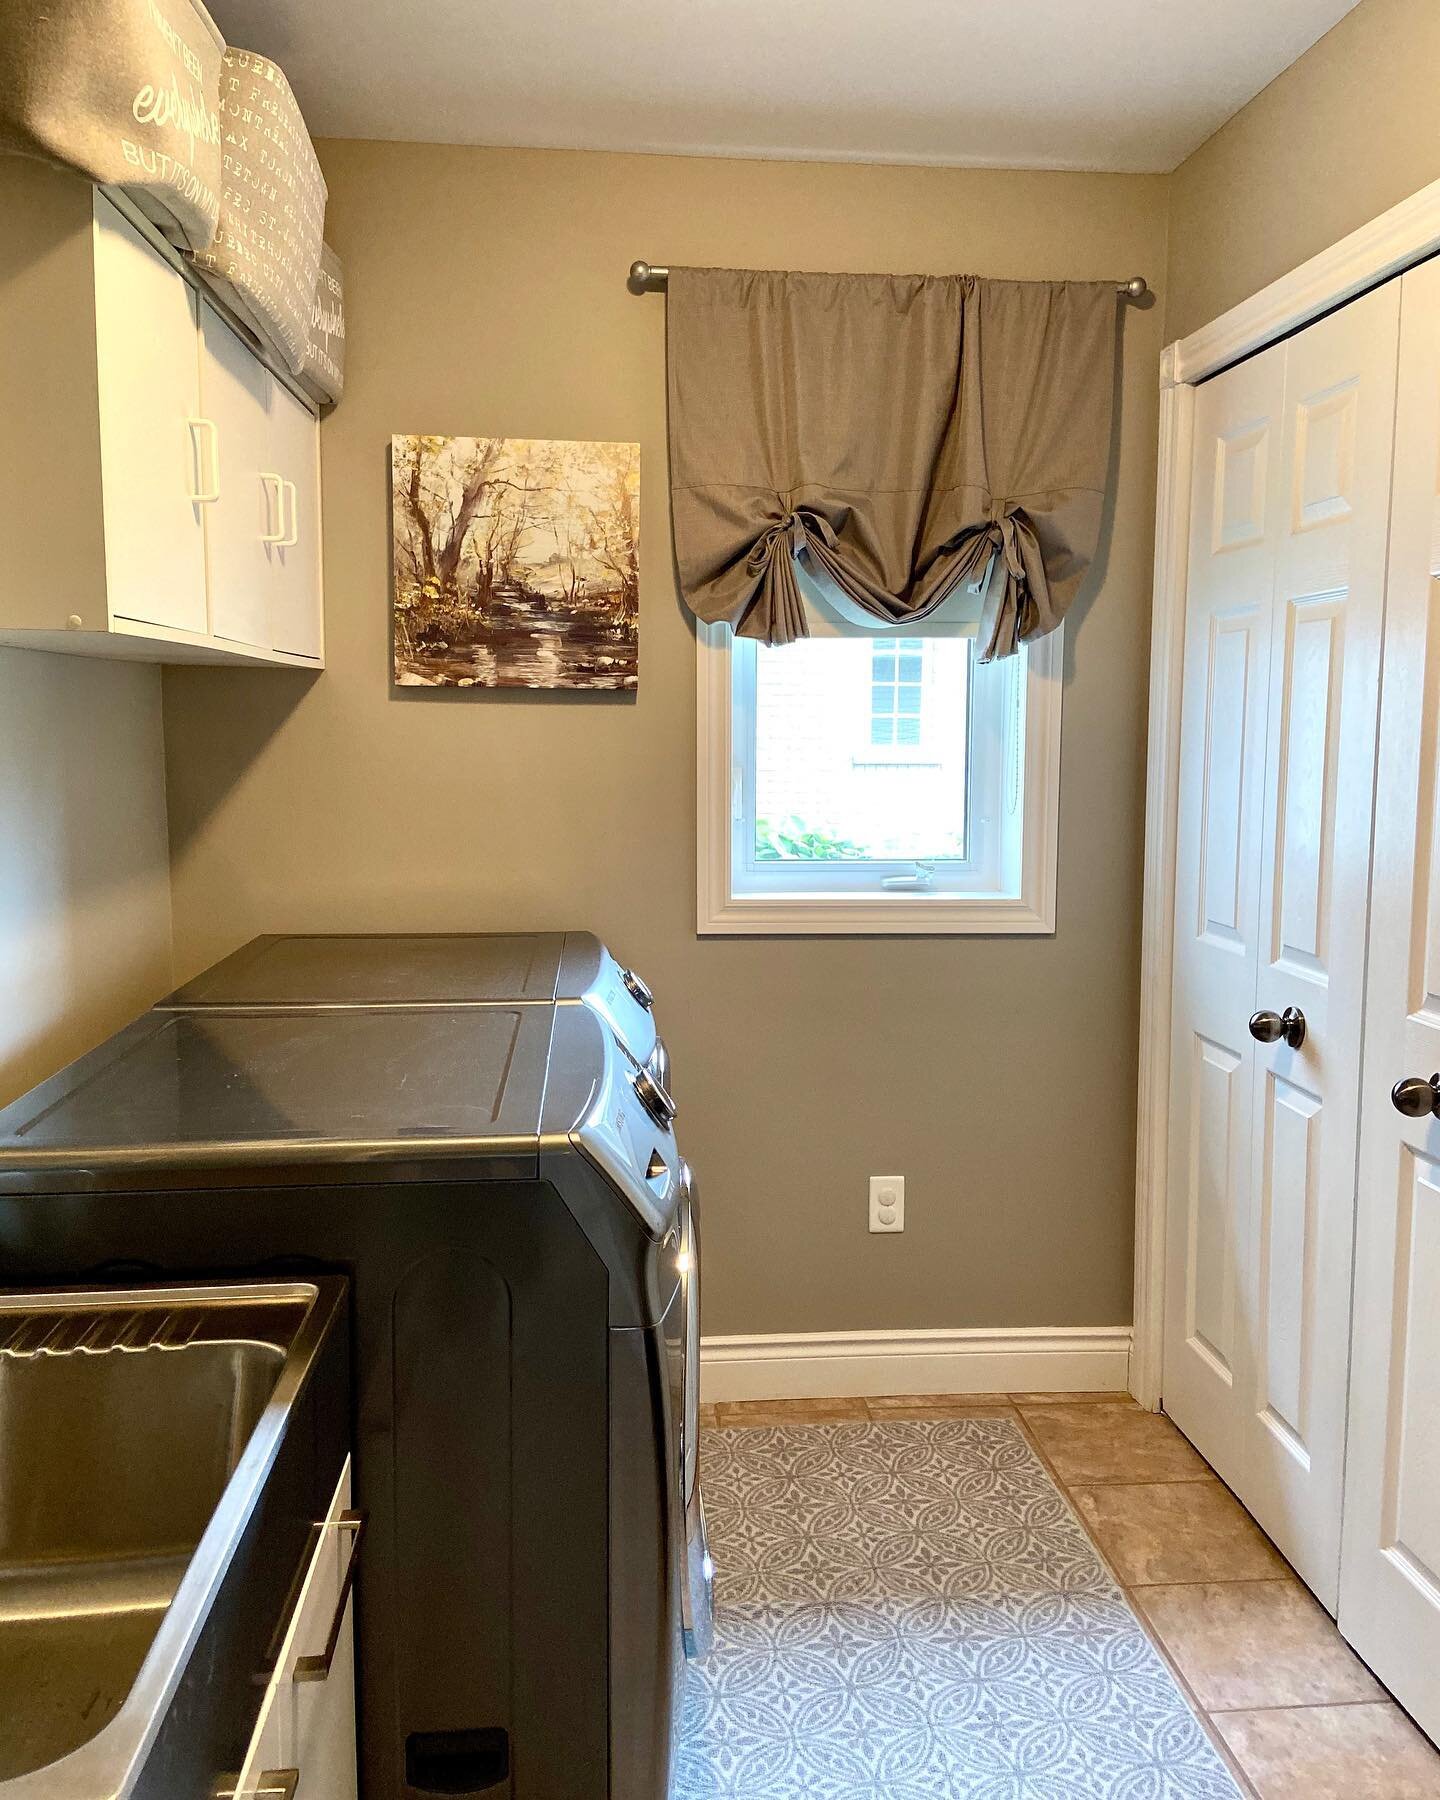 Laundry doesn&rsquo;t have to be such a chore with a an inviting space like this. Call us today or visit our website at elitepaint.ca to give your laundry room a fresh coat of paint!